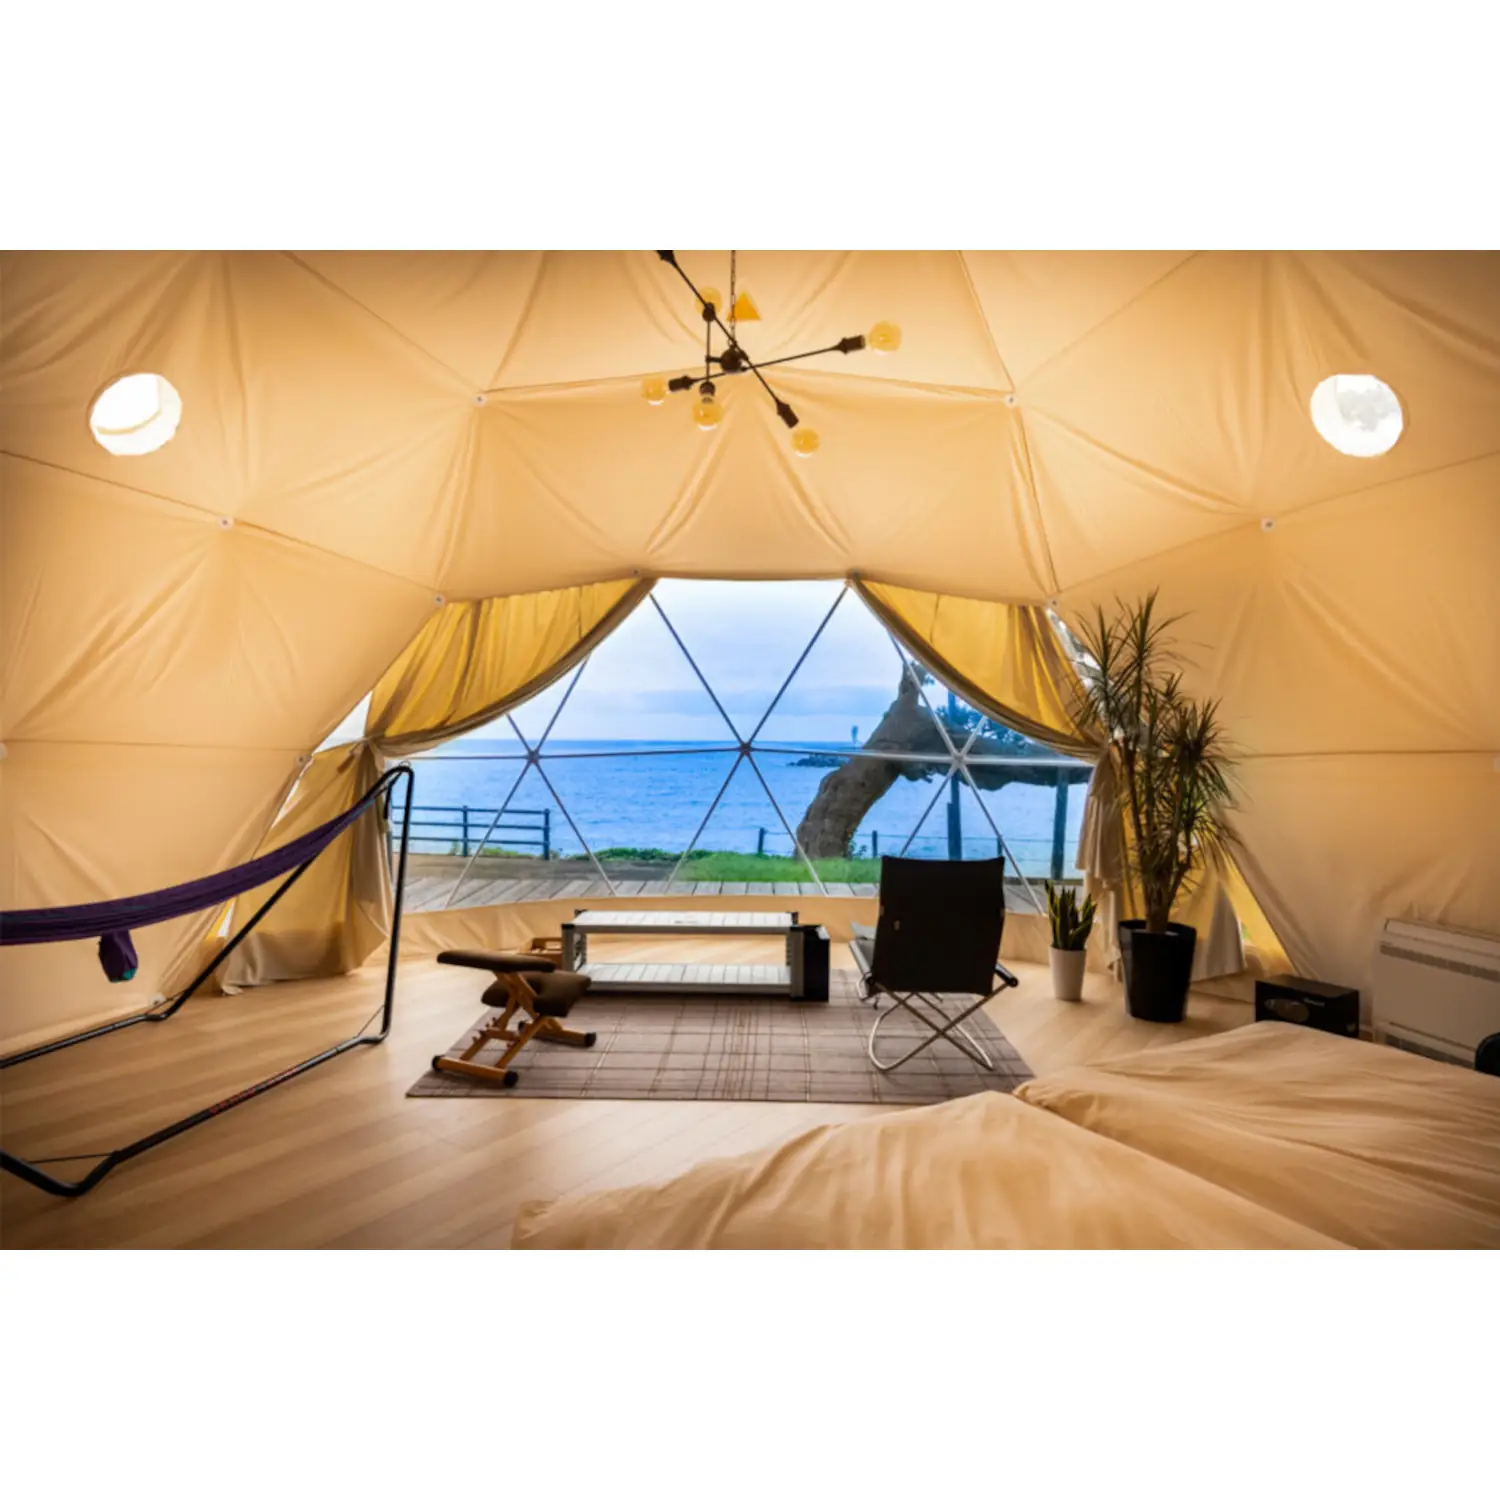 Glamping-dome-in-budget (7)